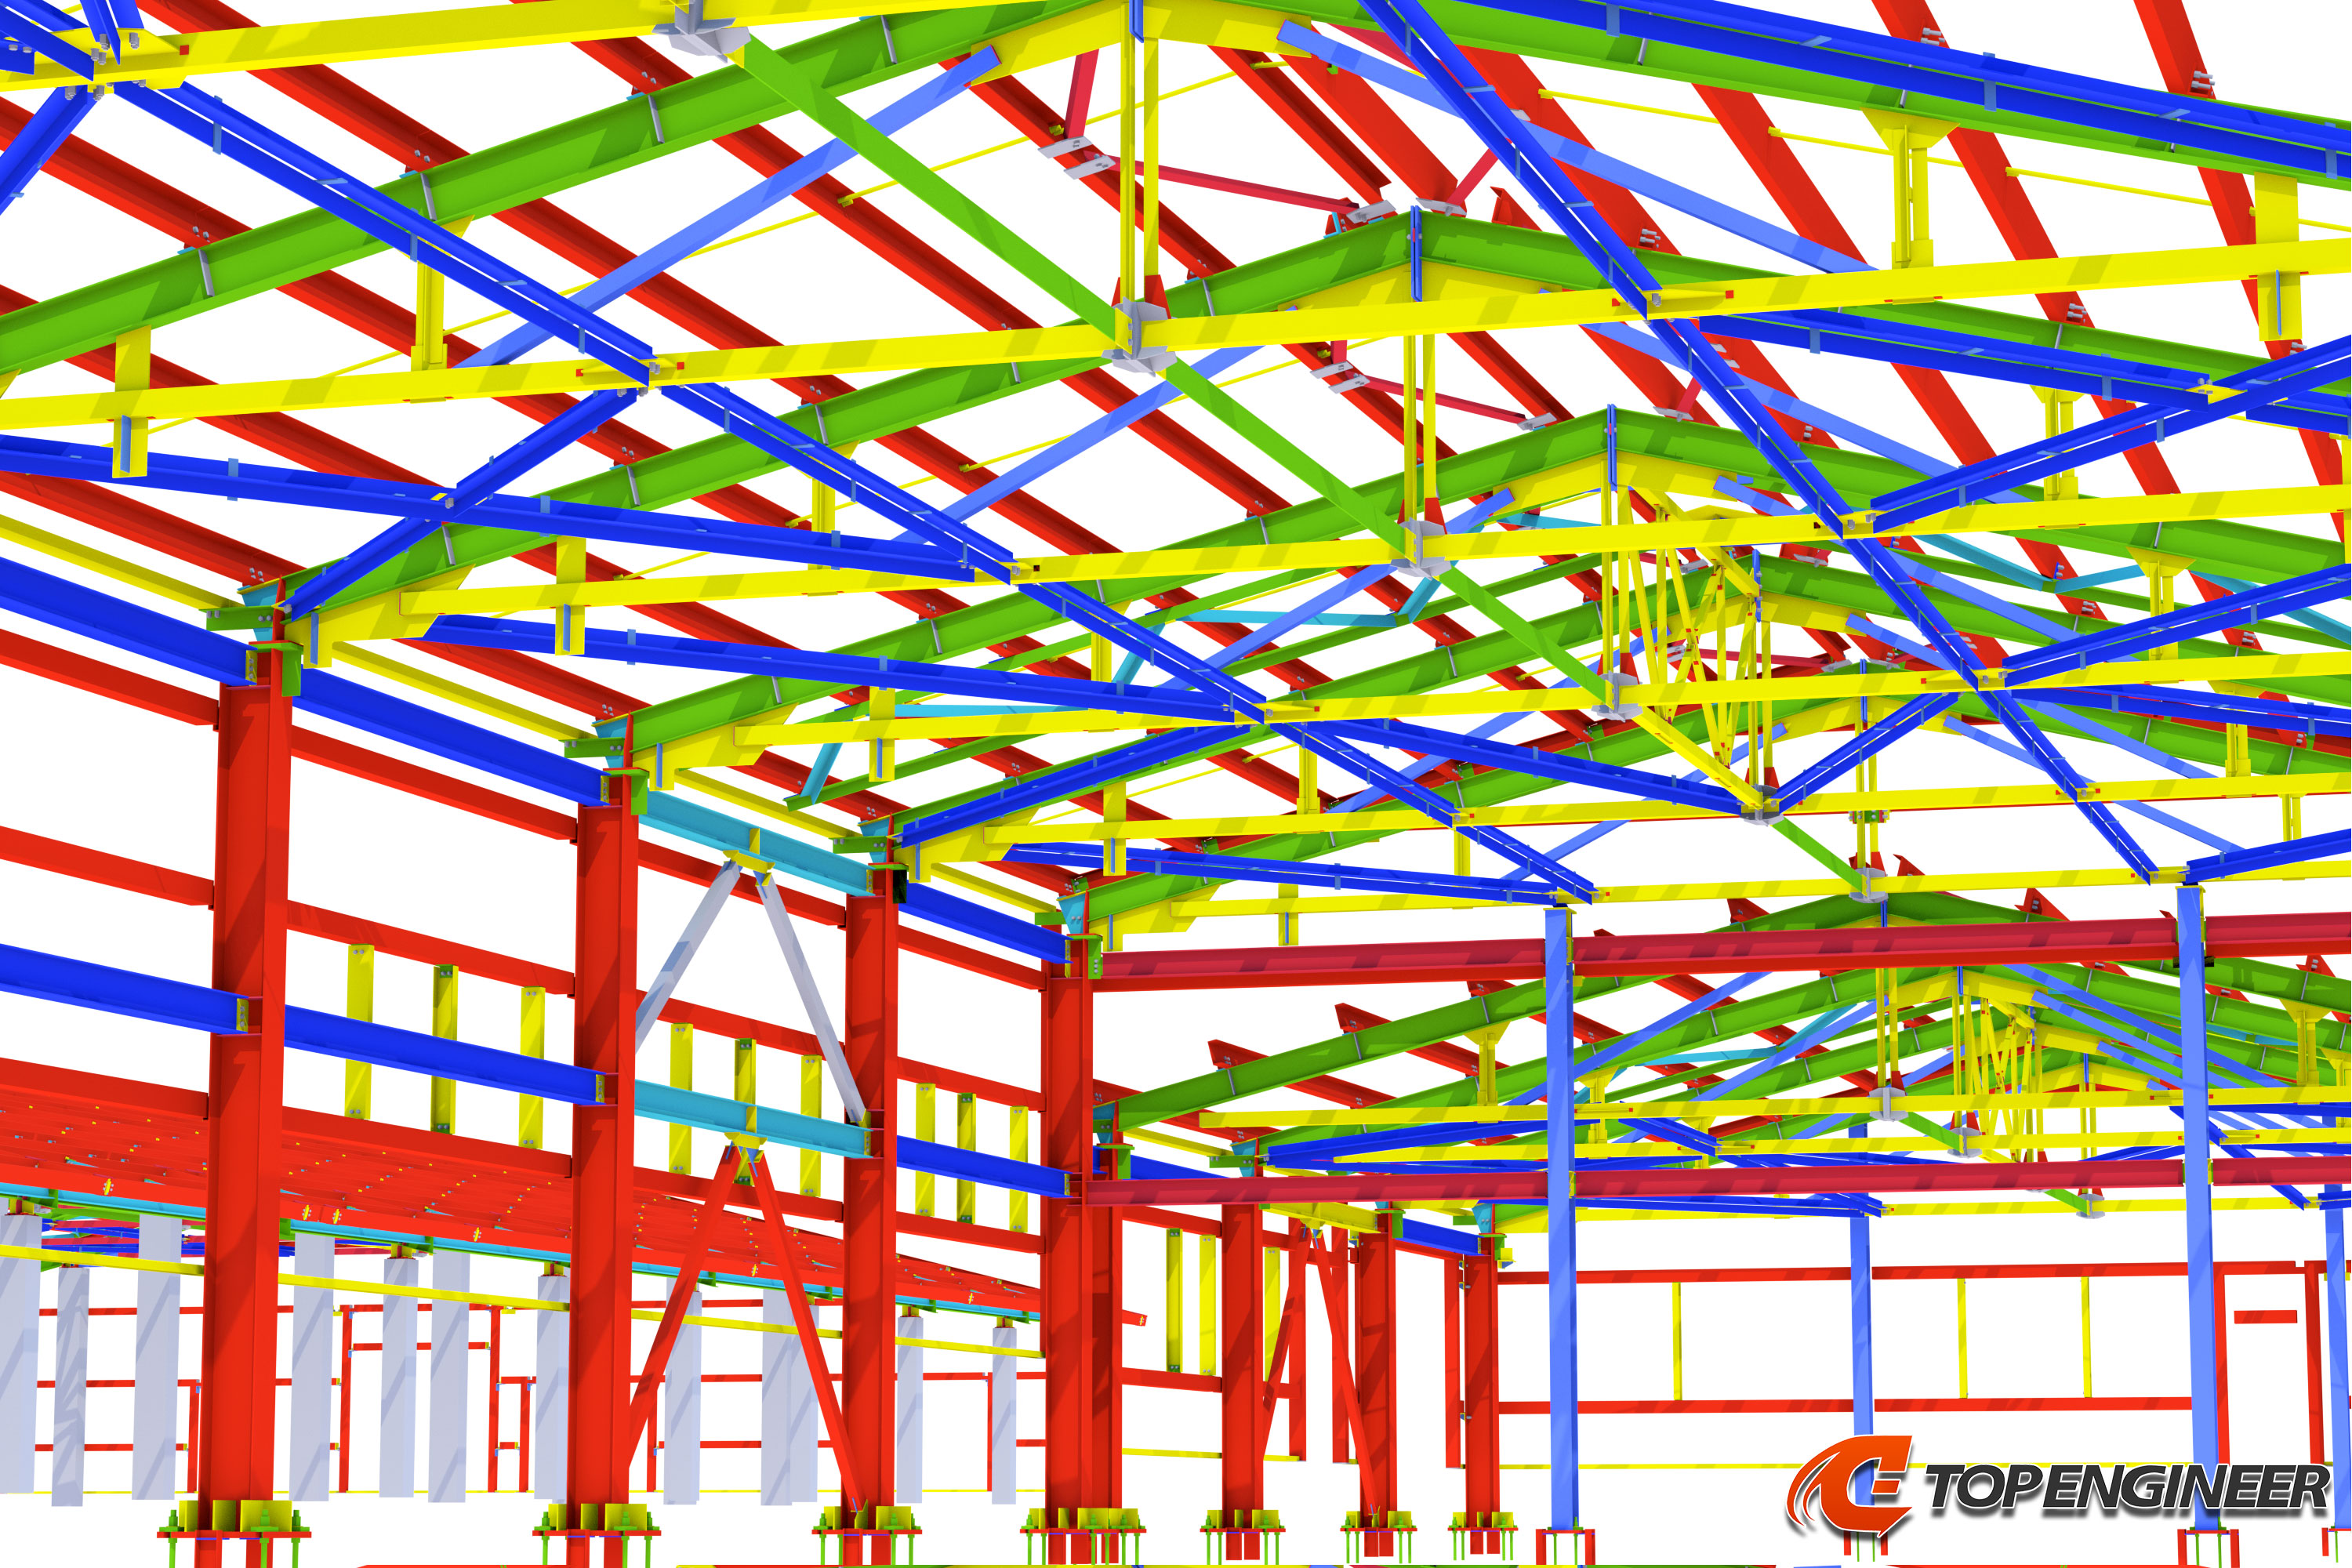 Structural drawings for warehouse in Tekla Structures